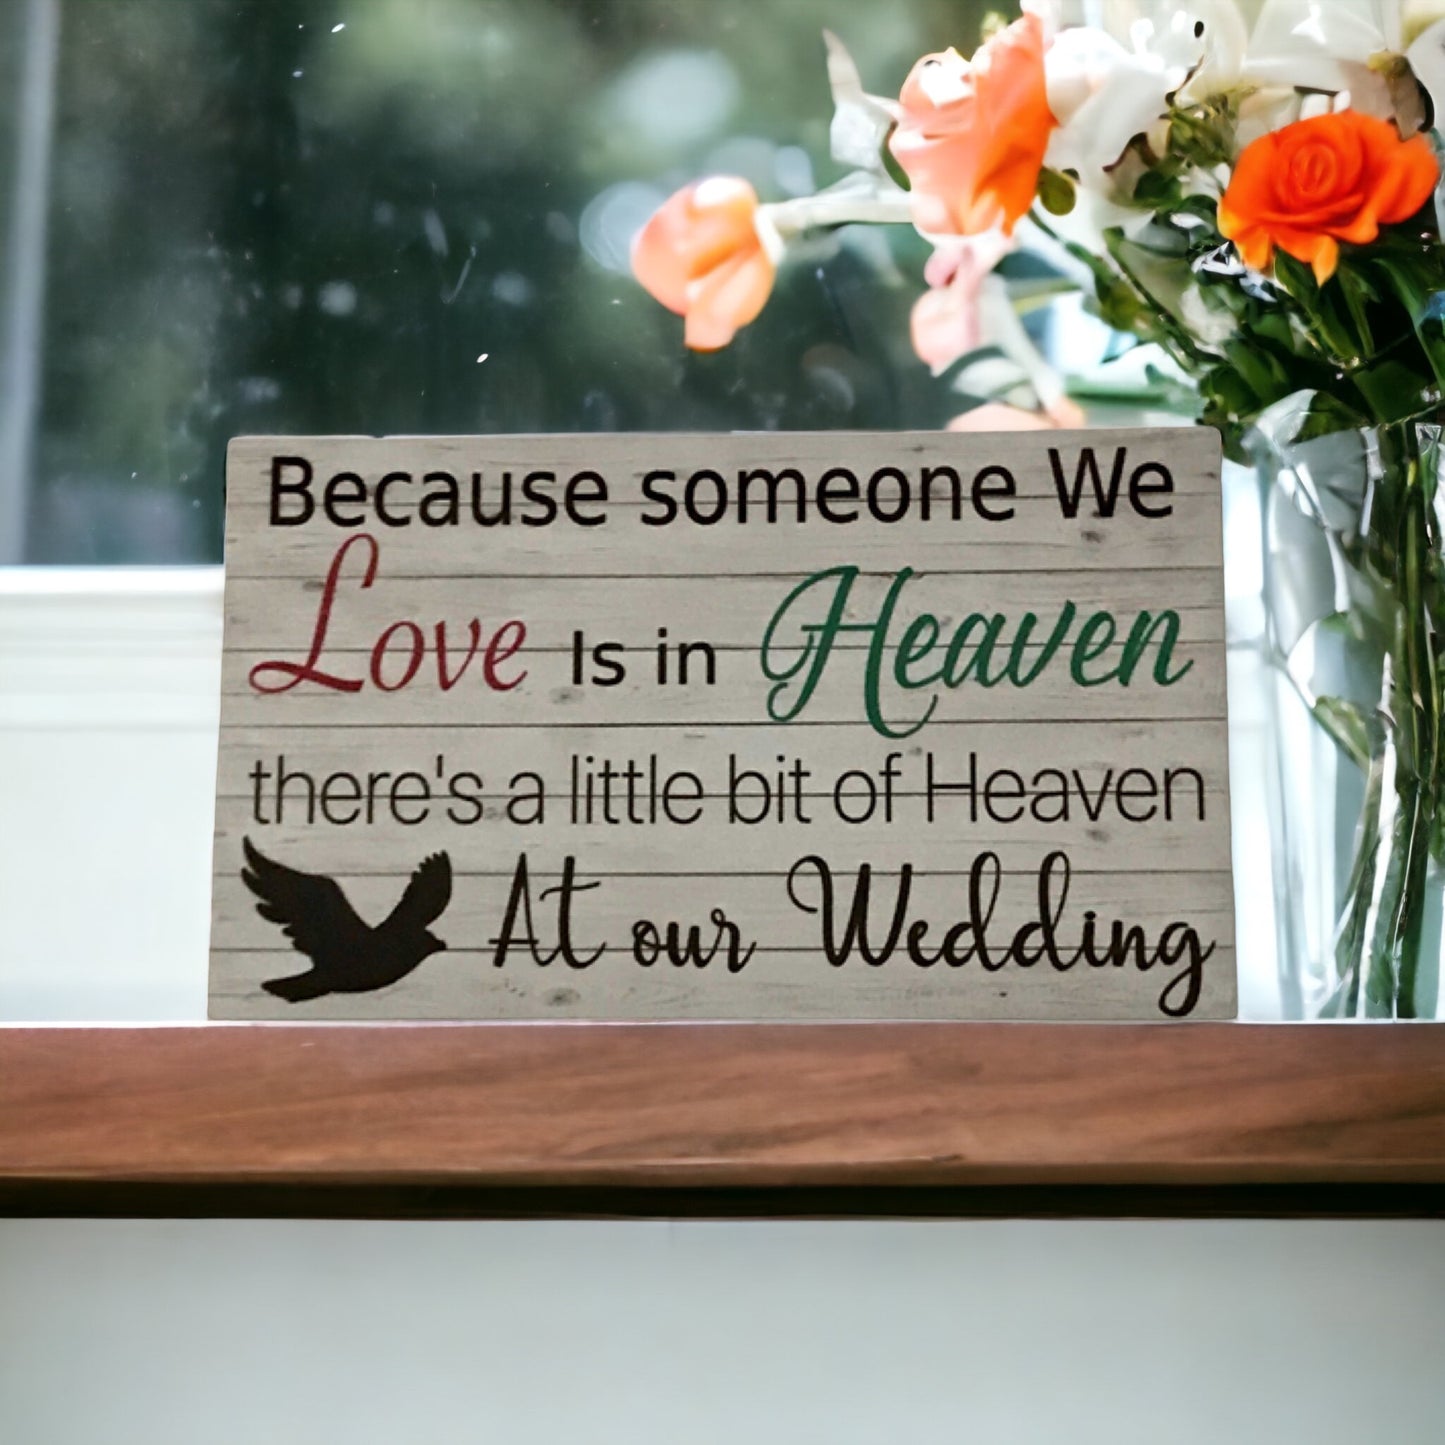 Love is in Heaven Wedding Timber Look Sign Plaque or Hanging - The Renmy Store Homewares & Gifts 